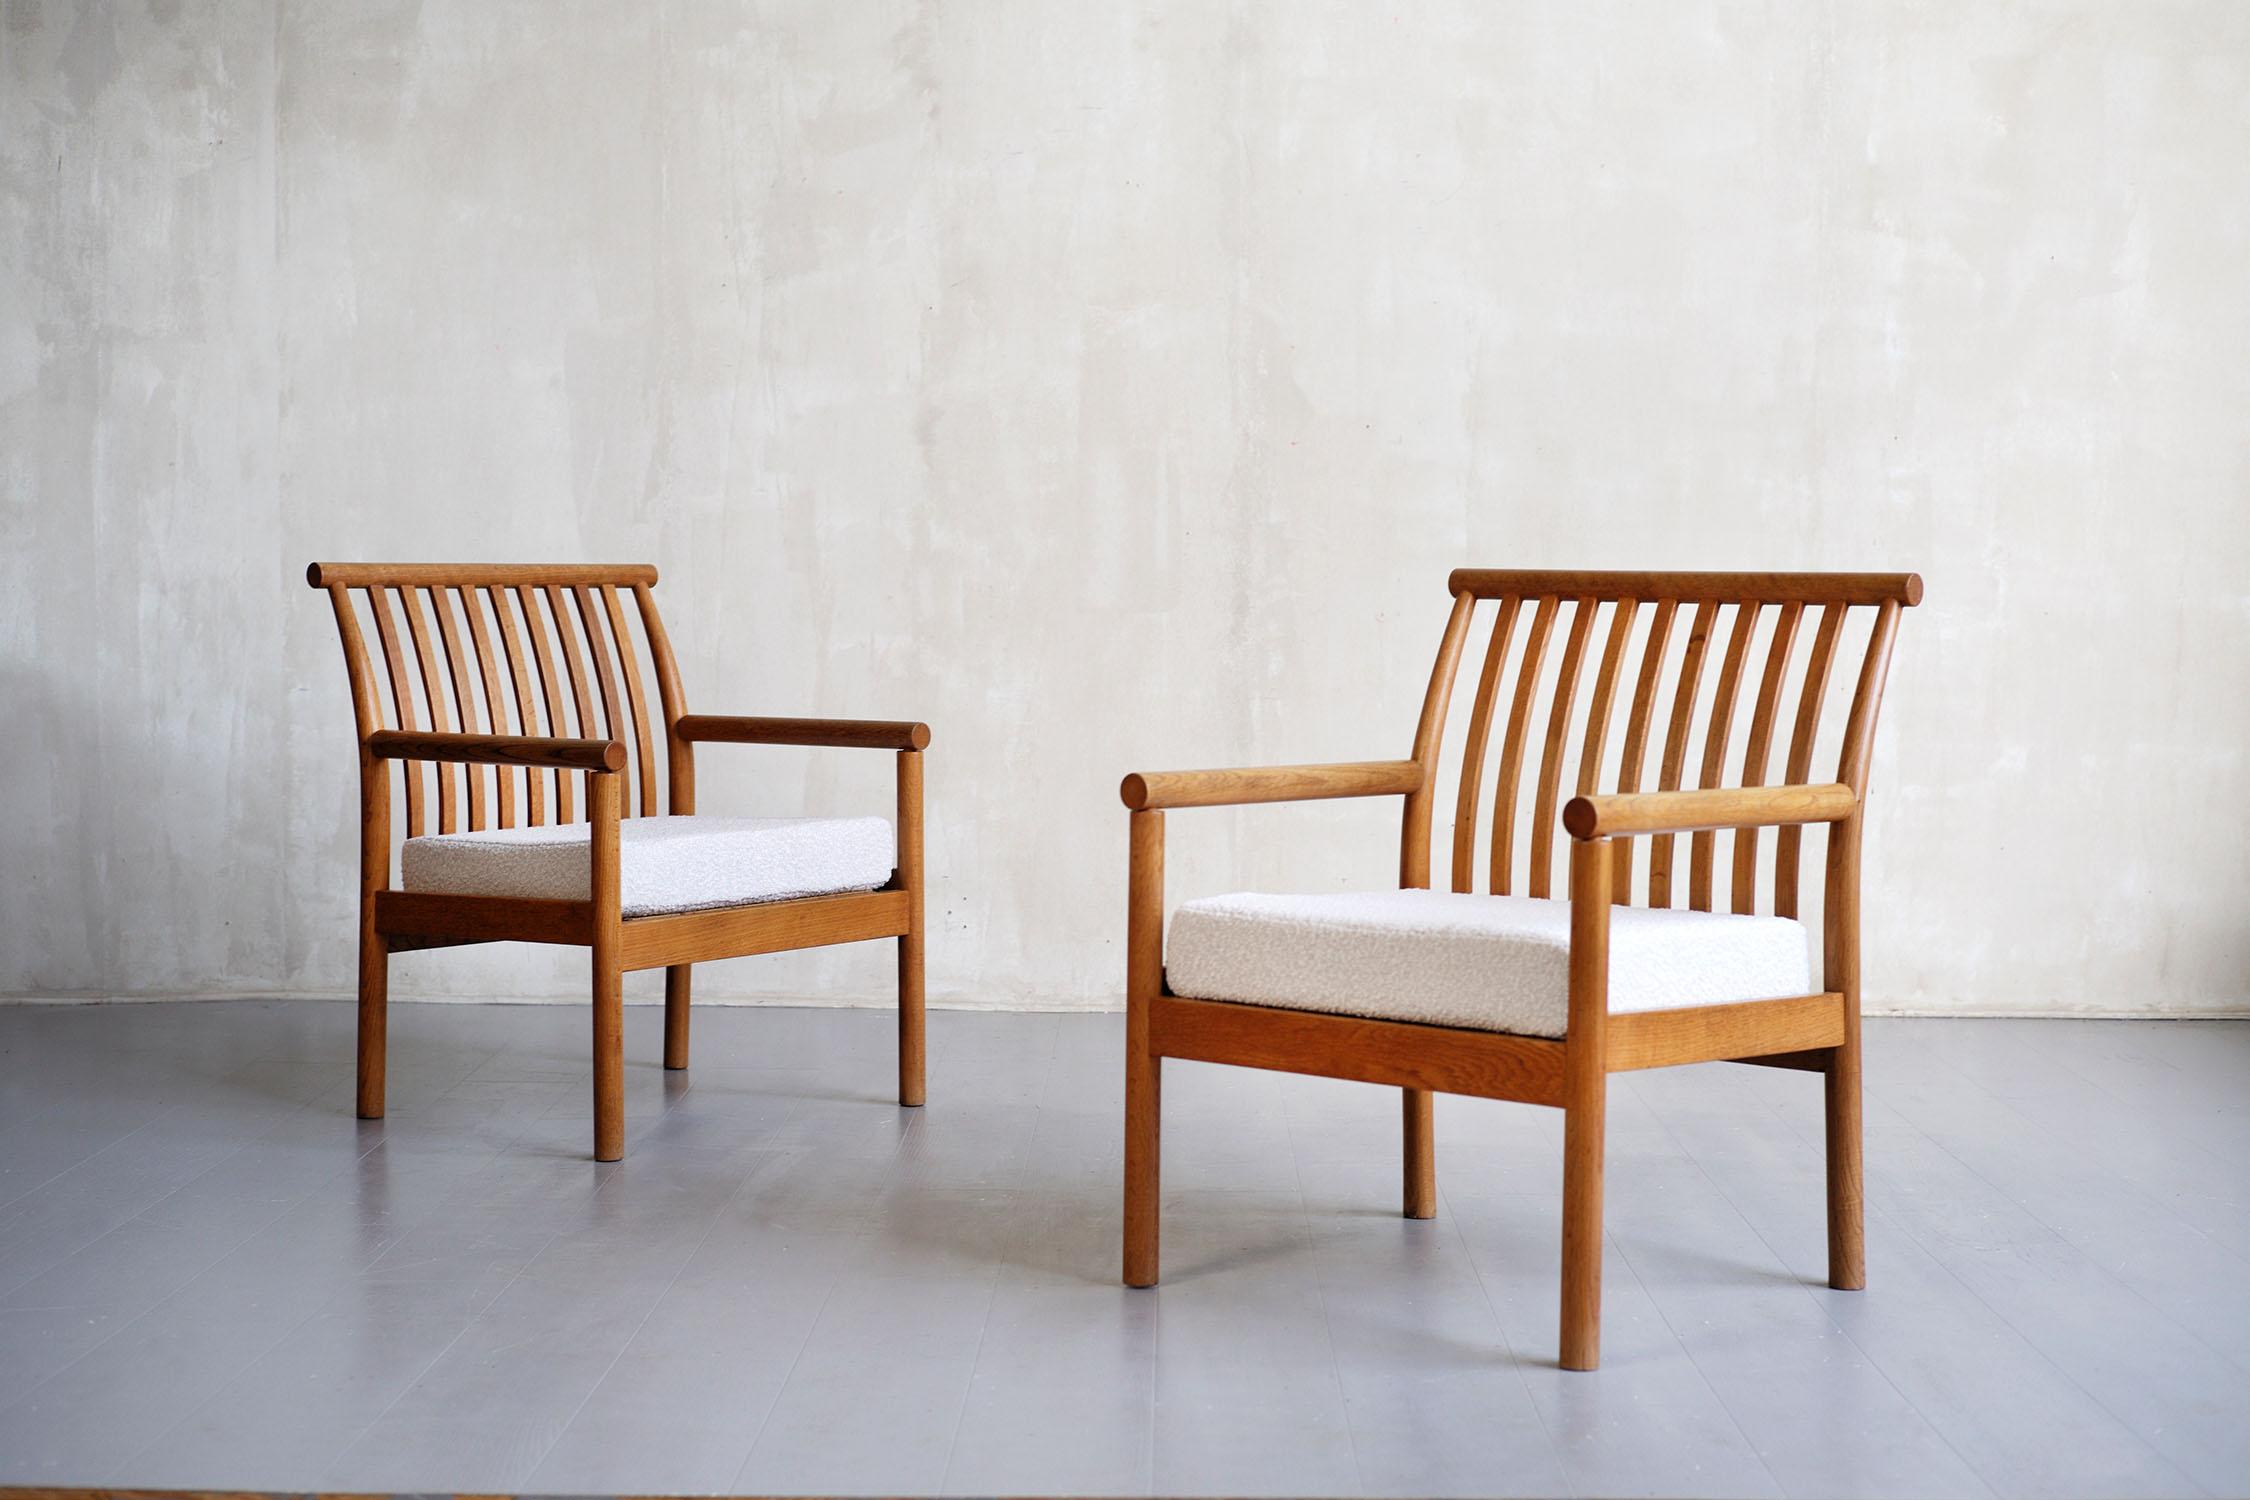 Isamu Kenmochi, Pair of Curved Oak Armchairs, Japan, 1960 For Sale 1